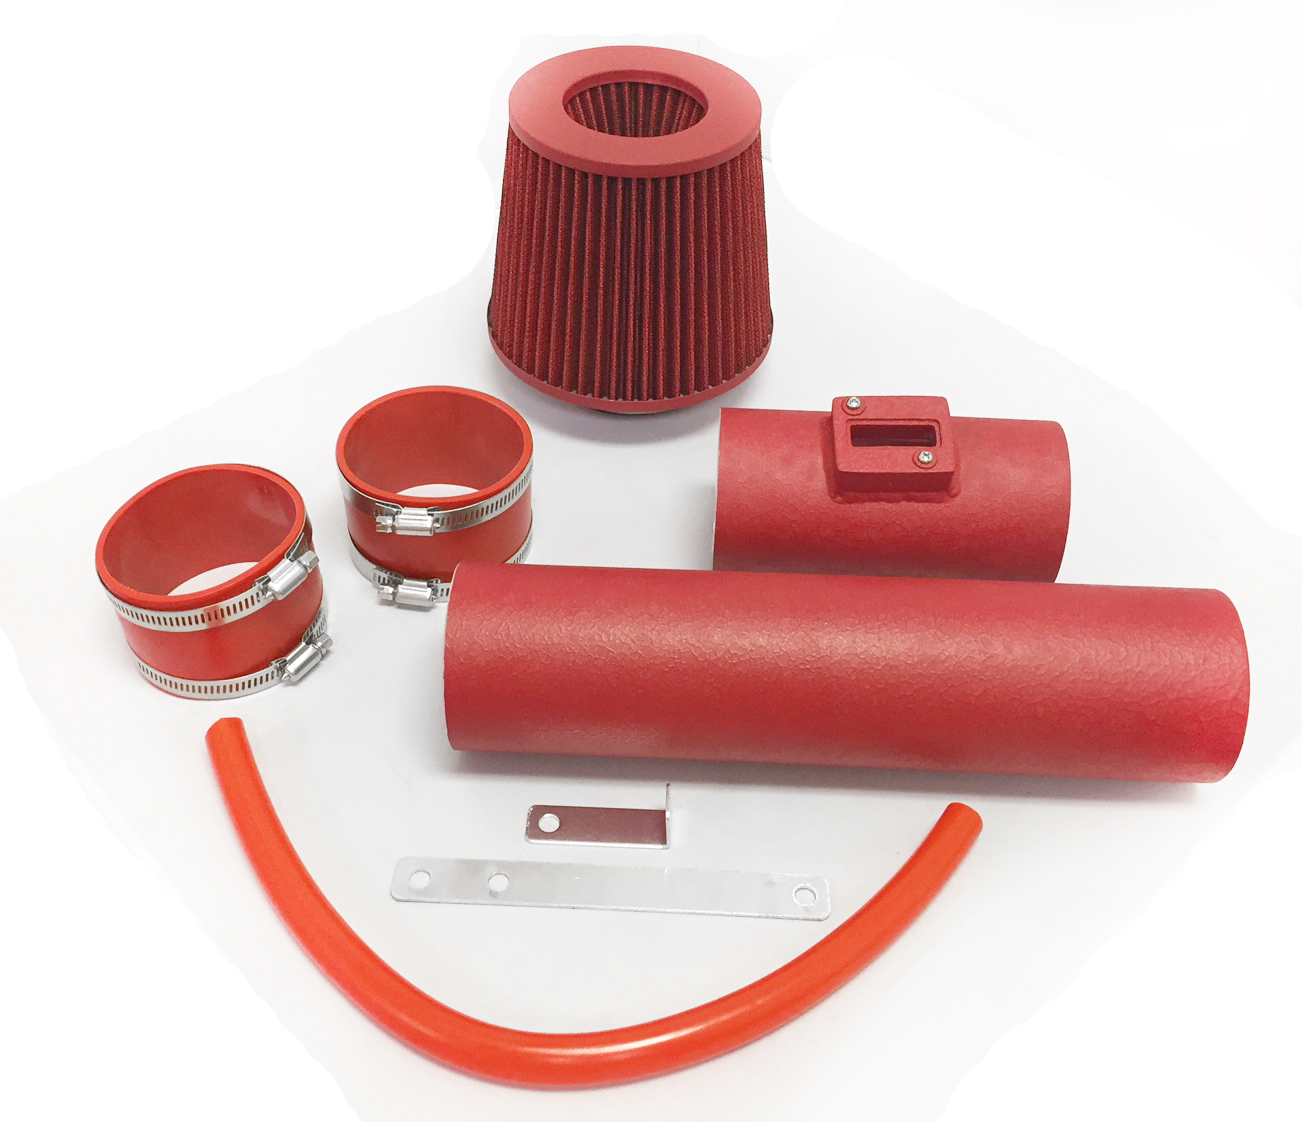 Coated Red For 2PC 2007-2012 Nissan Altima 3.5L V6 Air Intake Kit + Filter | eBay Air Filter For A 2012 Nissan Altima